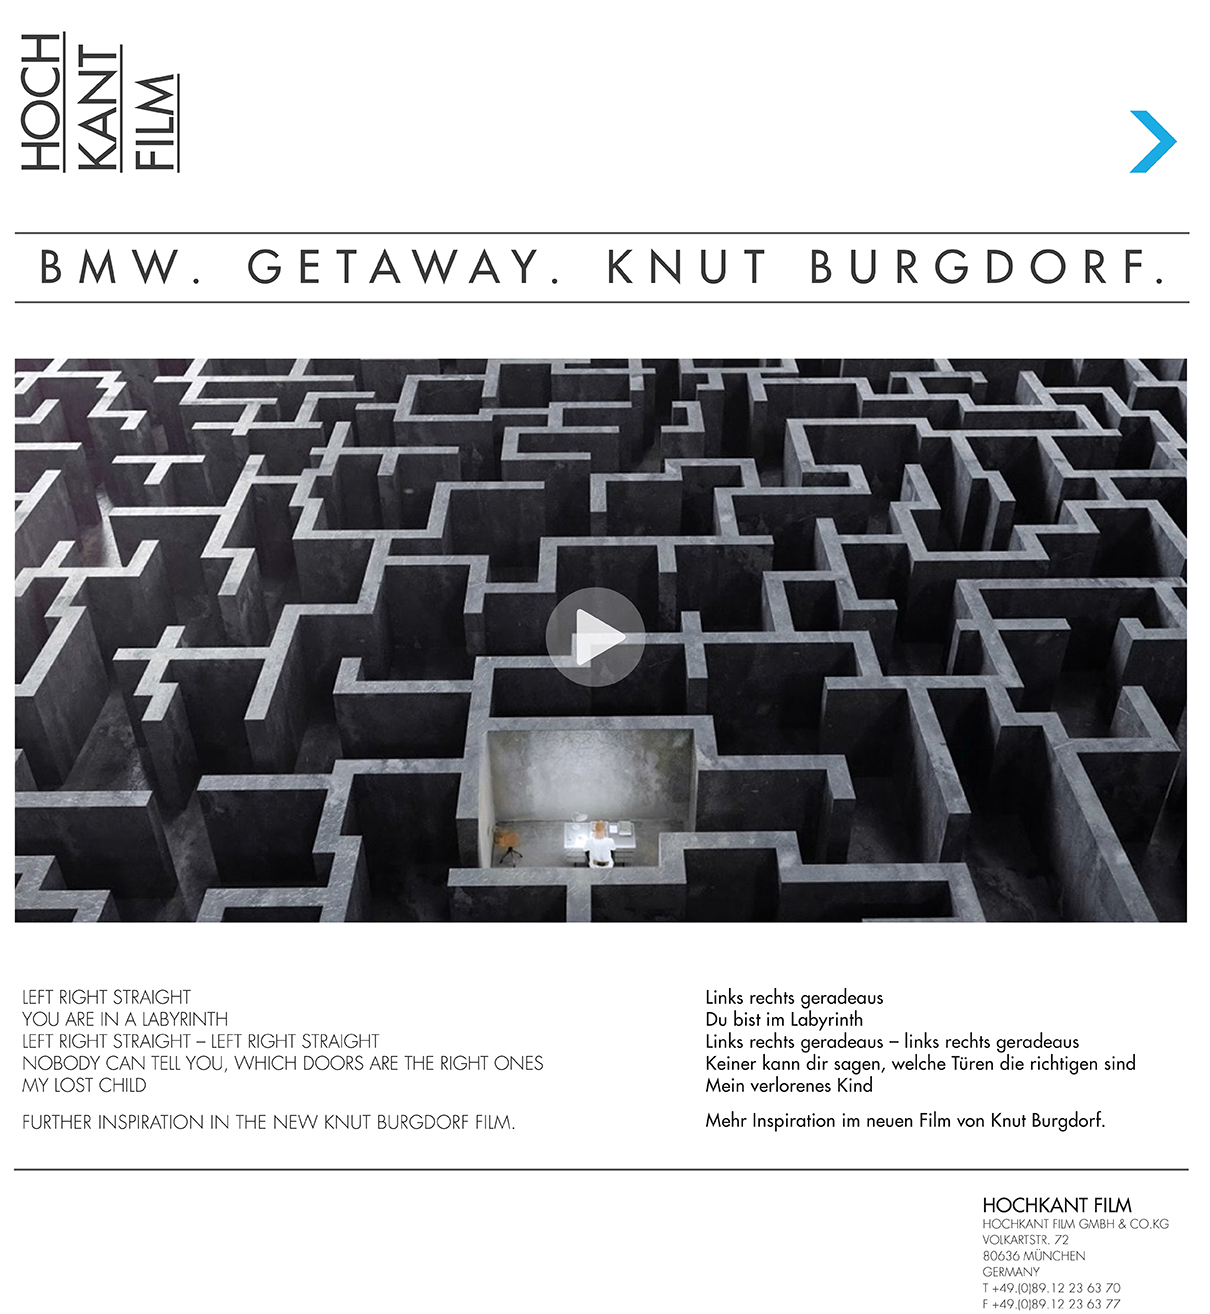 Left right straight - you are in a labyrinth -left right straight – left right straight - nobody can tell you, which doors are the right ones my lost child - further inspiration in the new knut burgdorf film.<br />
